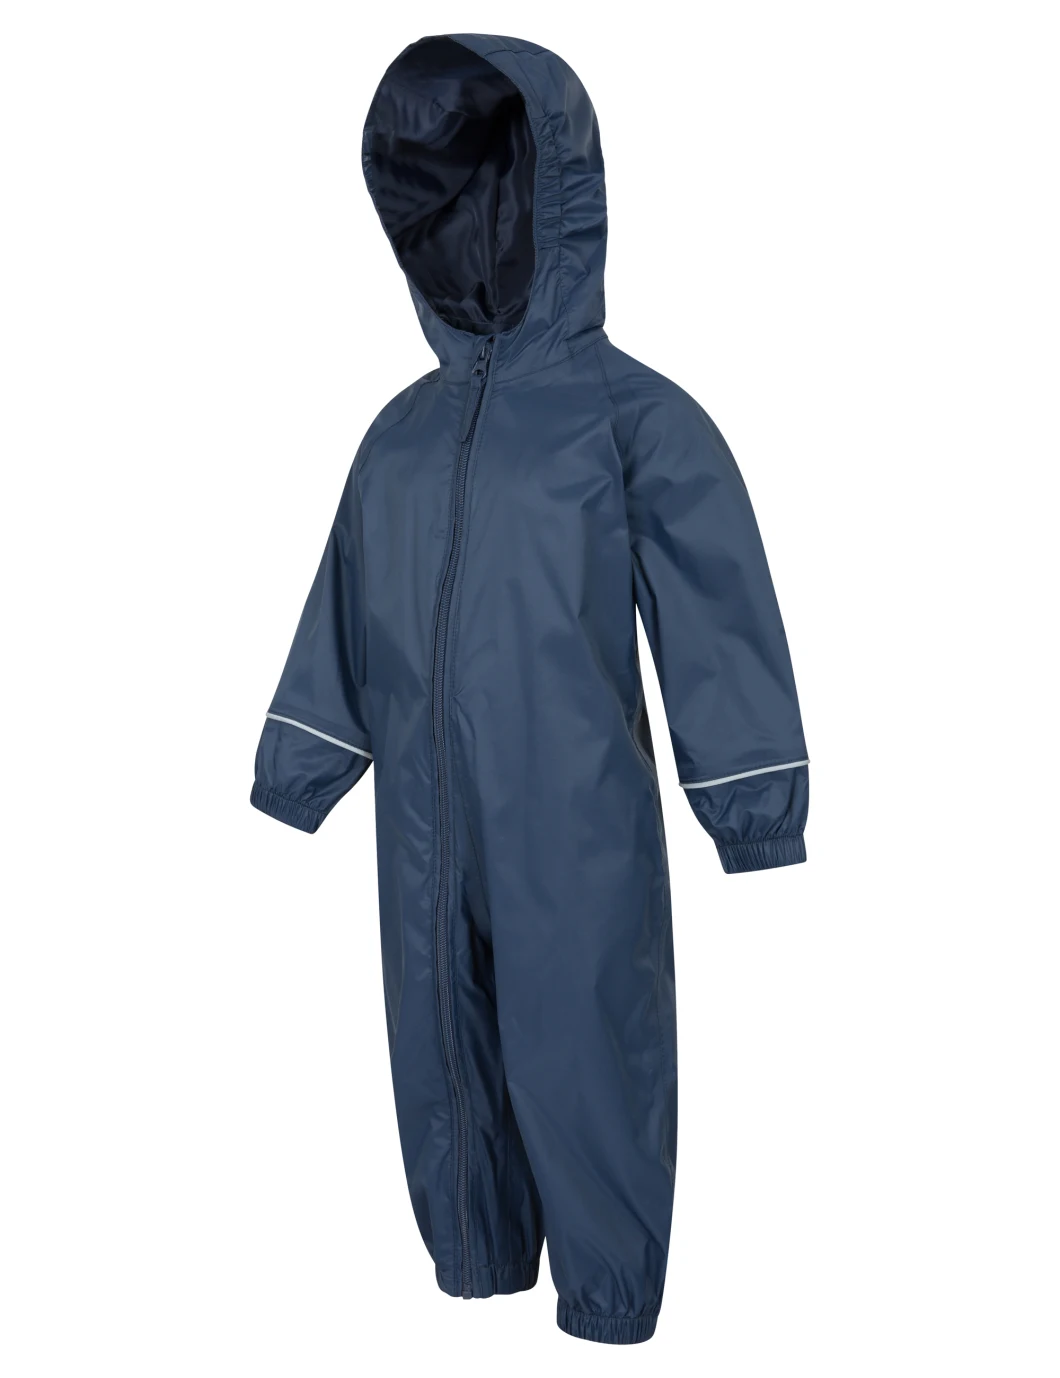 Wholesale Kids/Toddler/Childrens Waterproof Coat Puddle Rain Suit All in One PVC Raincoat